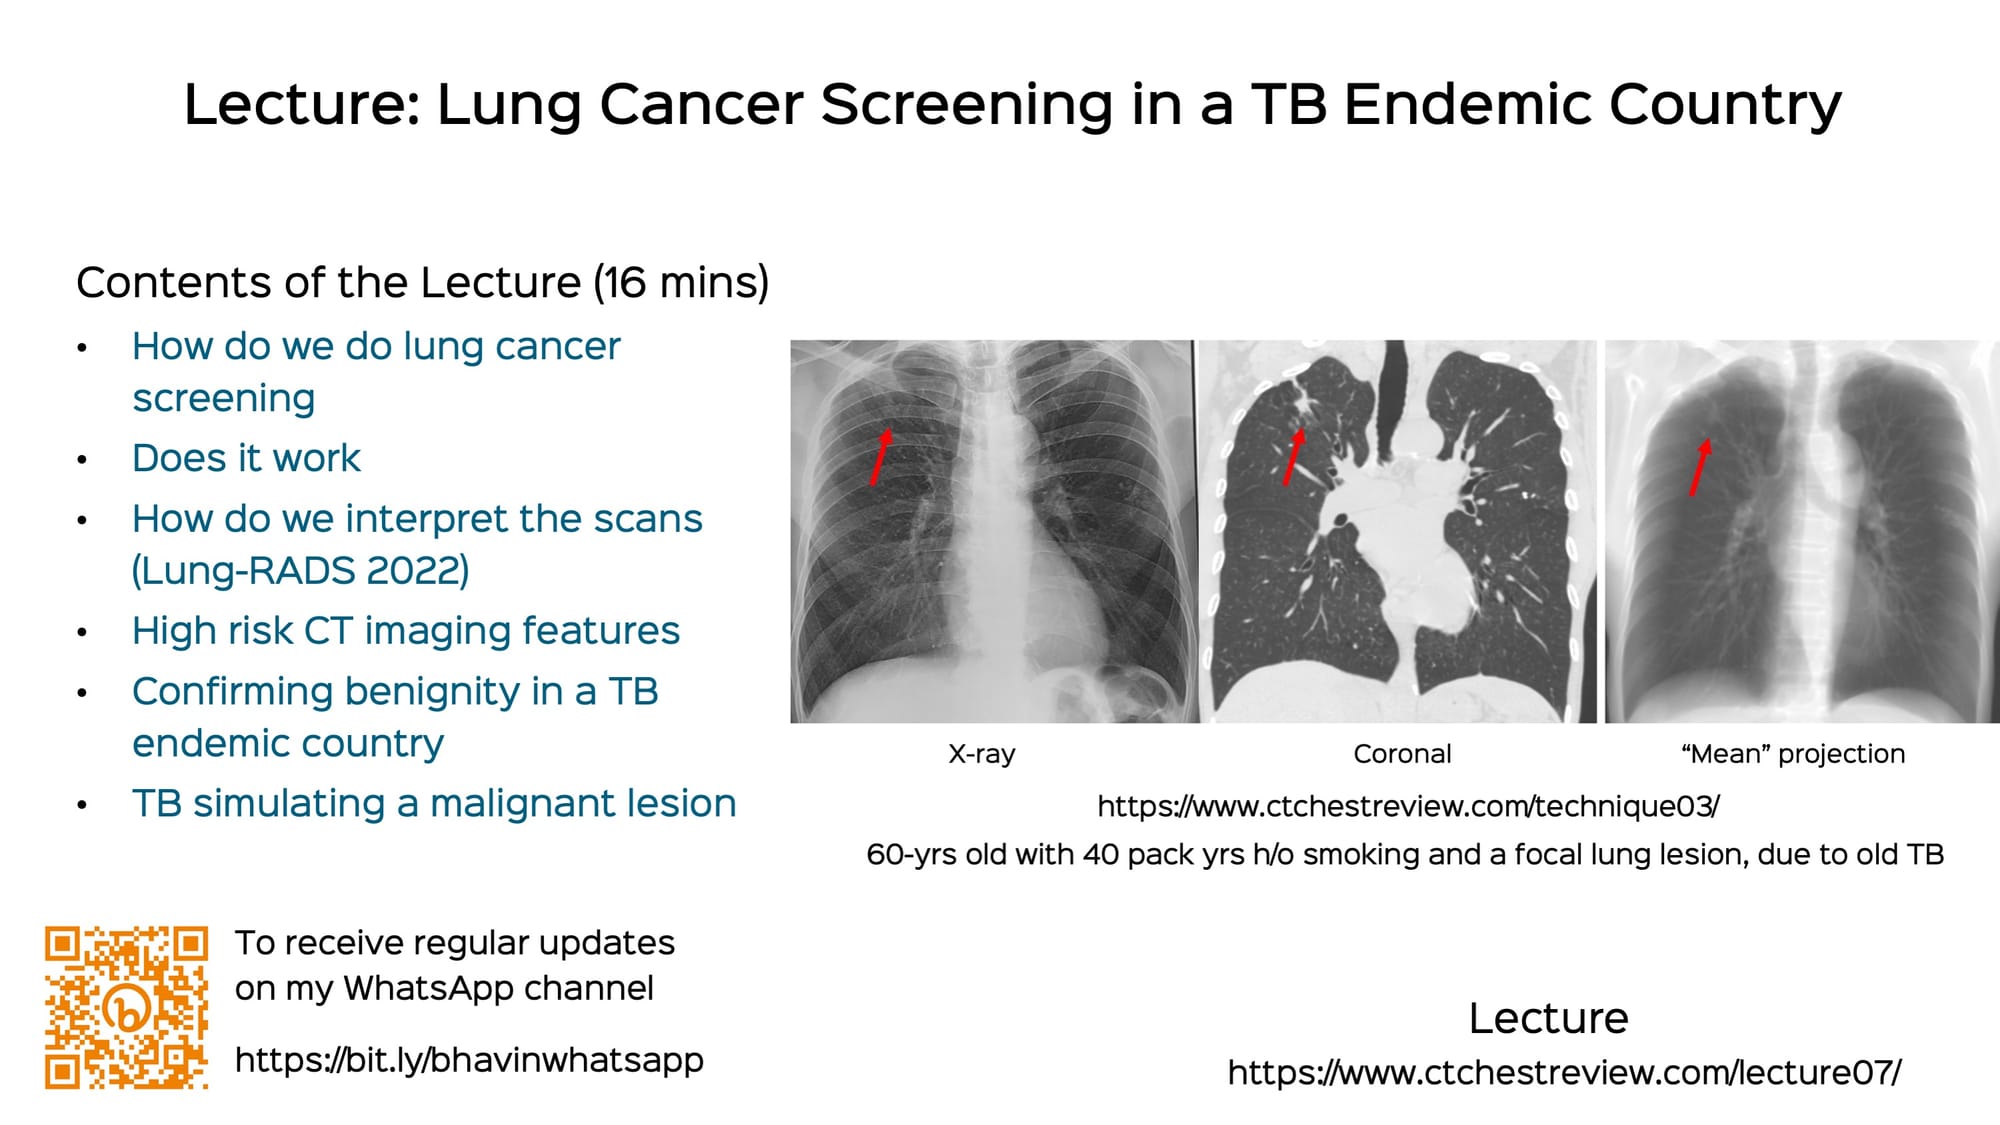 Lecture: Lung Cancer Screening in a TB Endemic Country